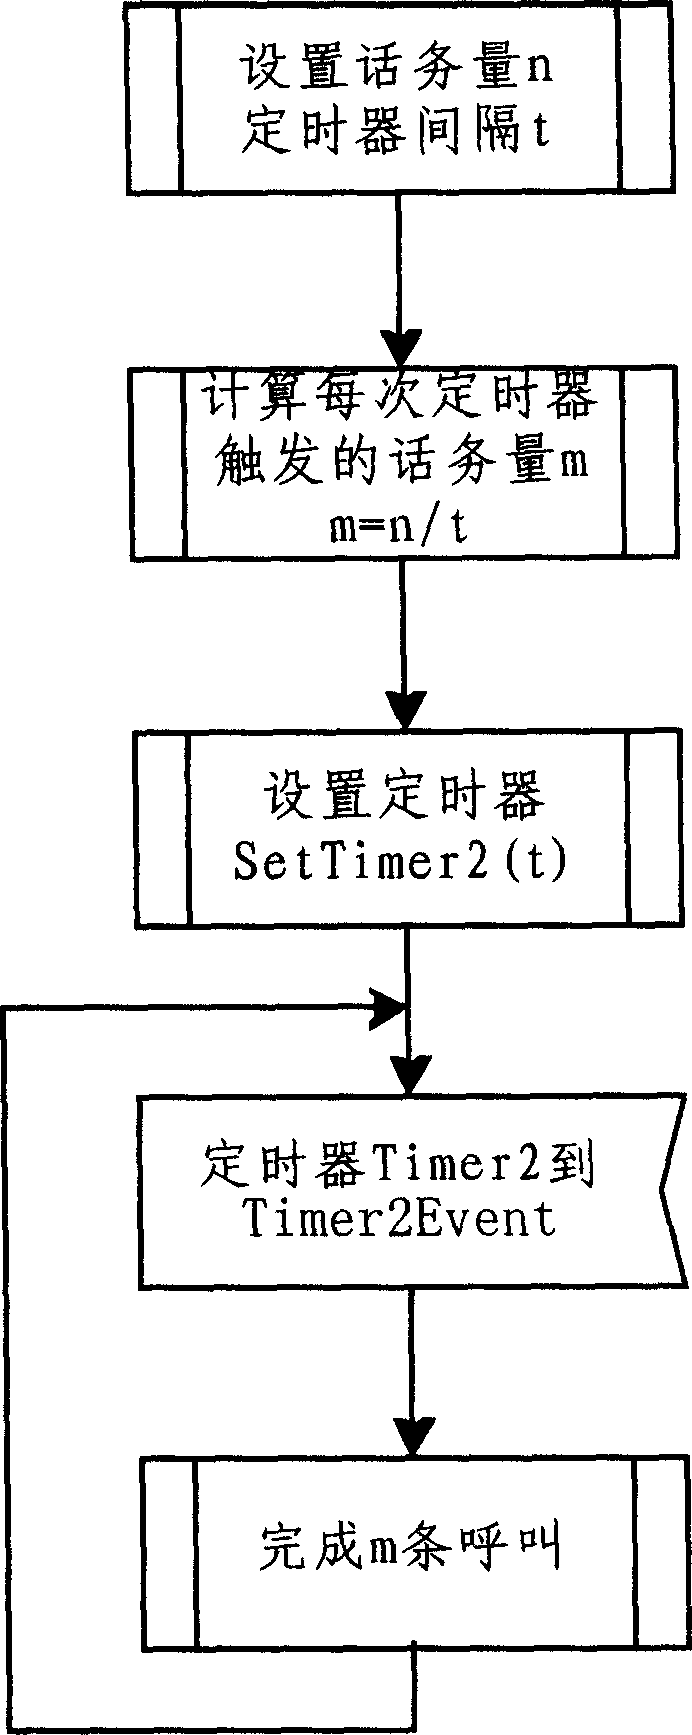 Method for controlling traffic in simulation of large traffic test